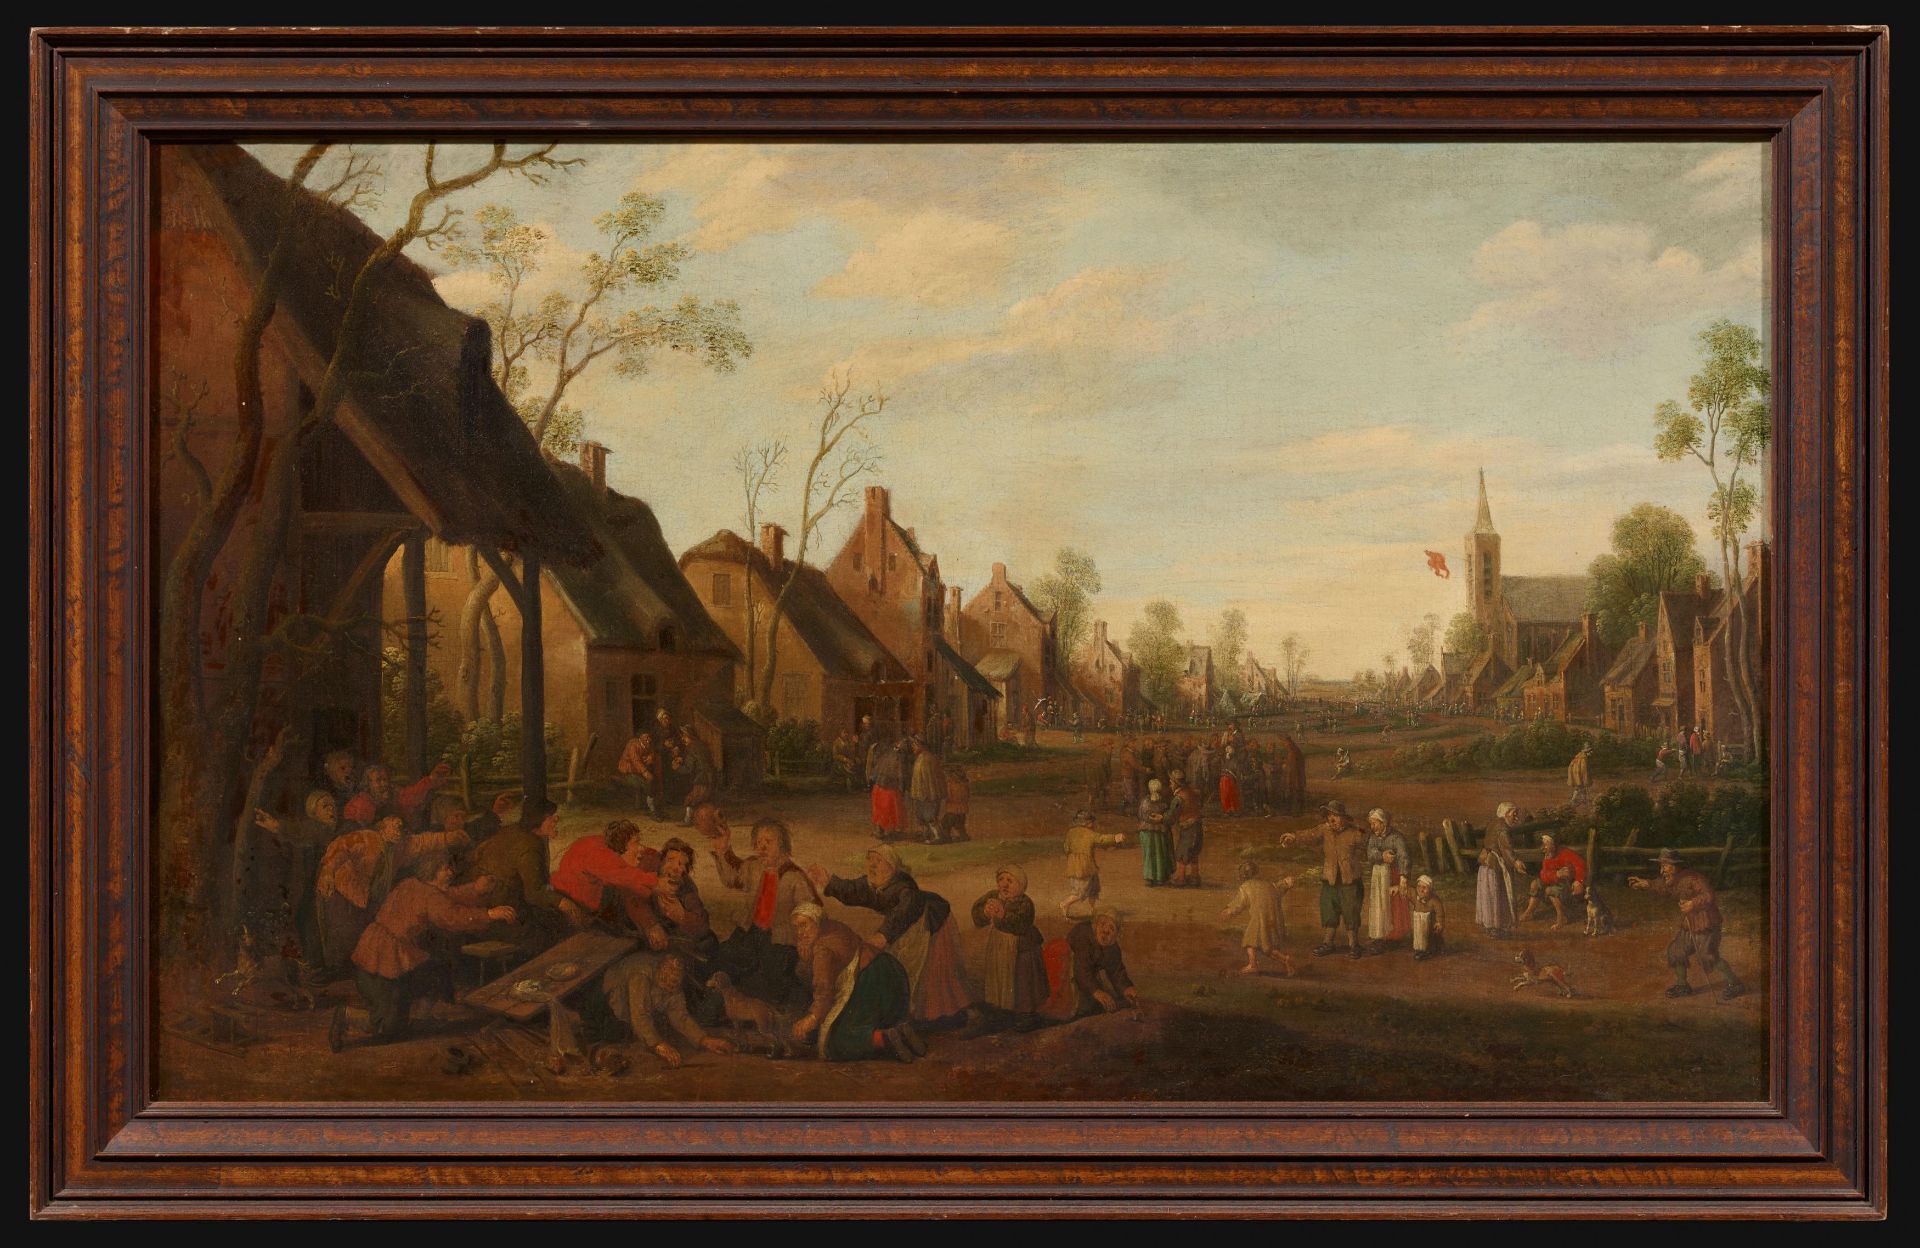 Joost Cornelisz Droochsloot : View of a Village with Scuffling Peasants and Quacks - Image 2 of 4